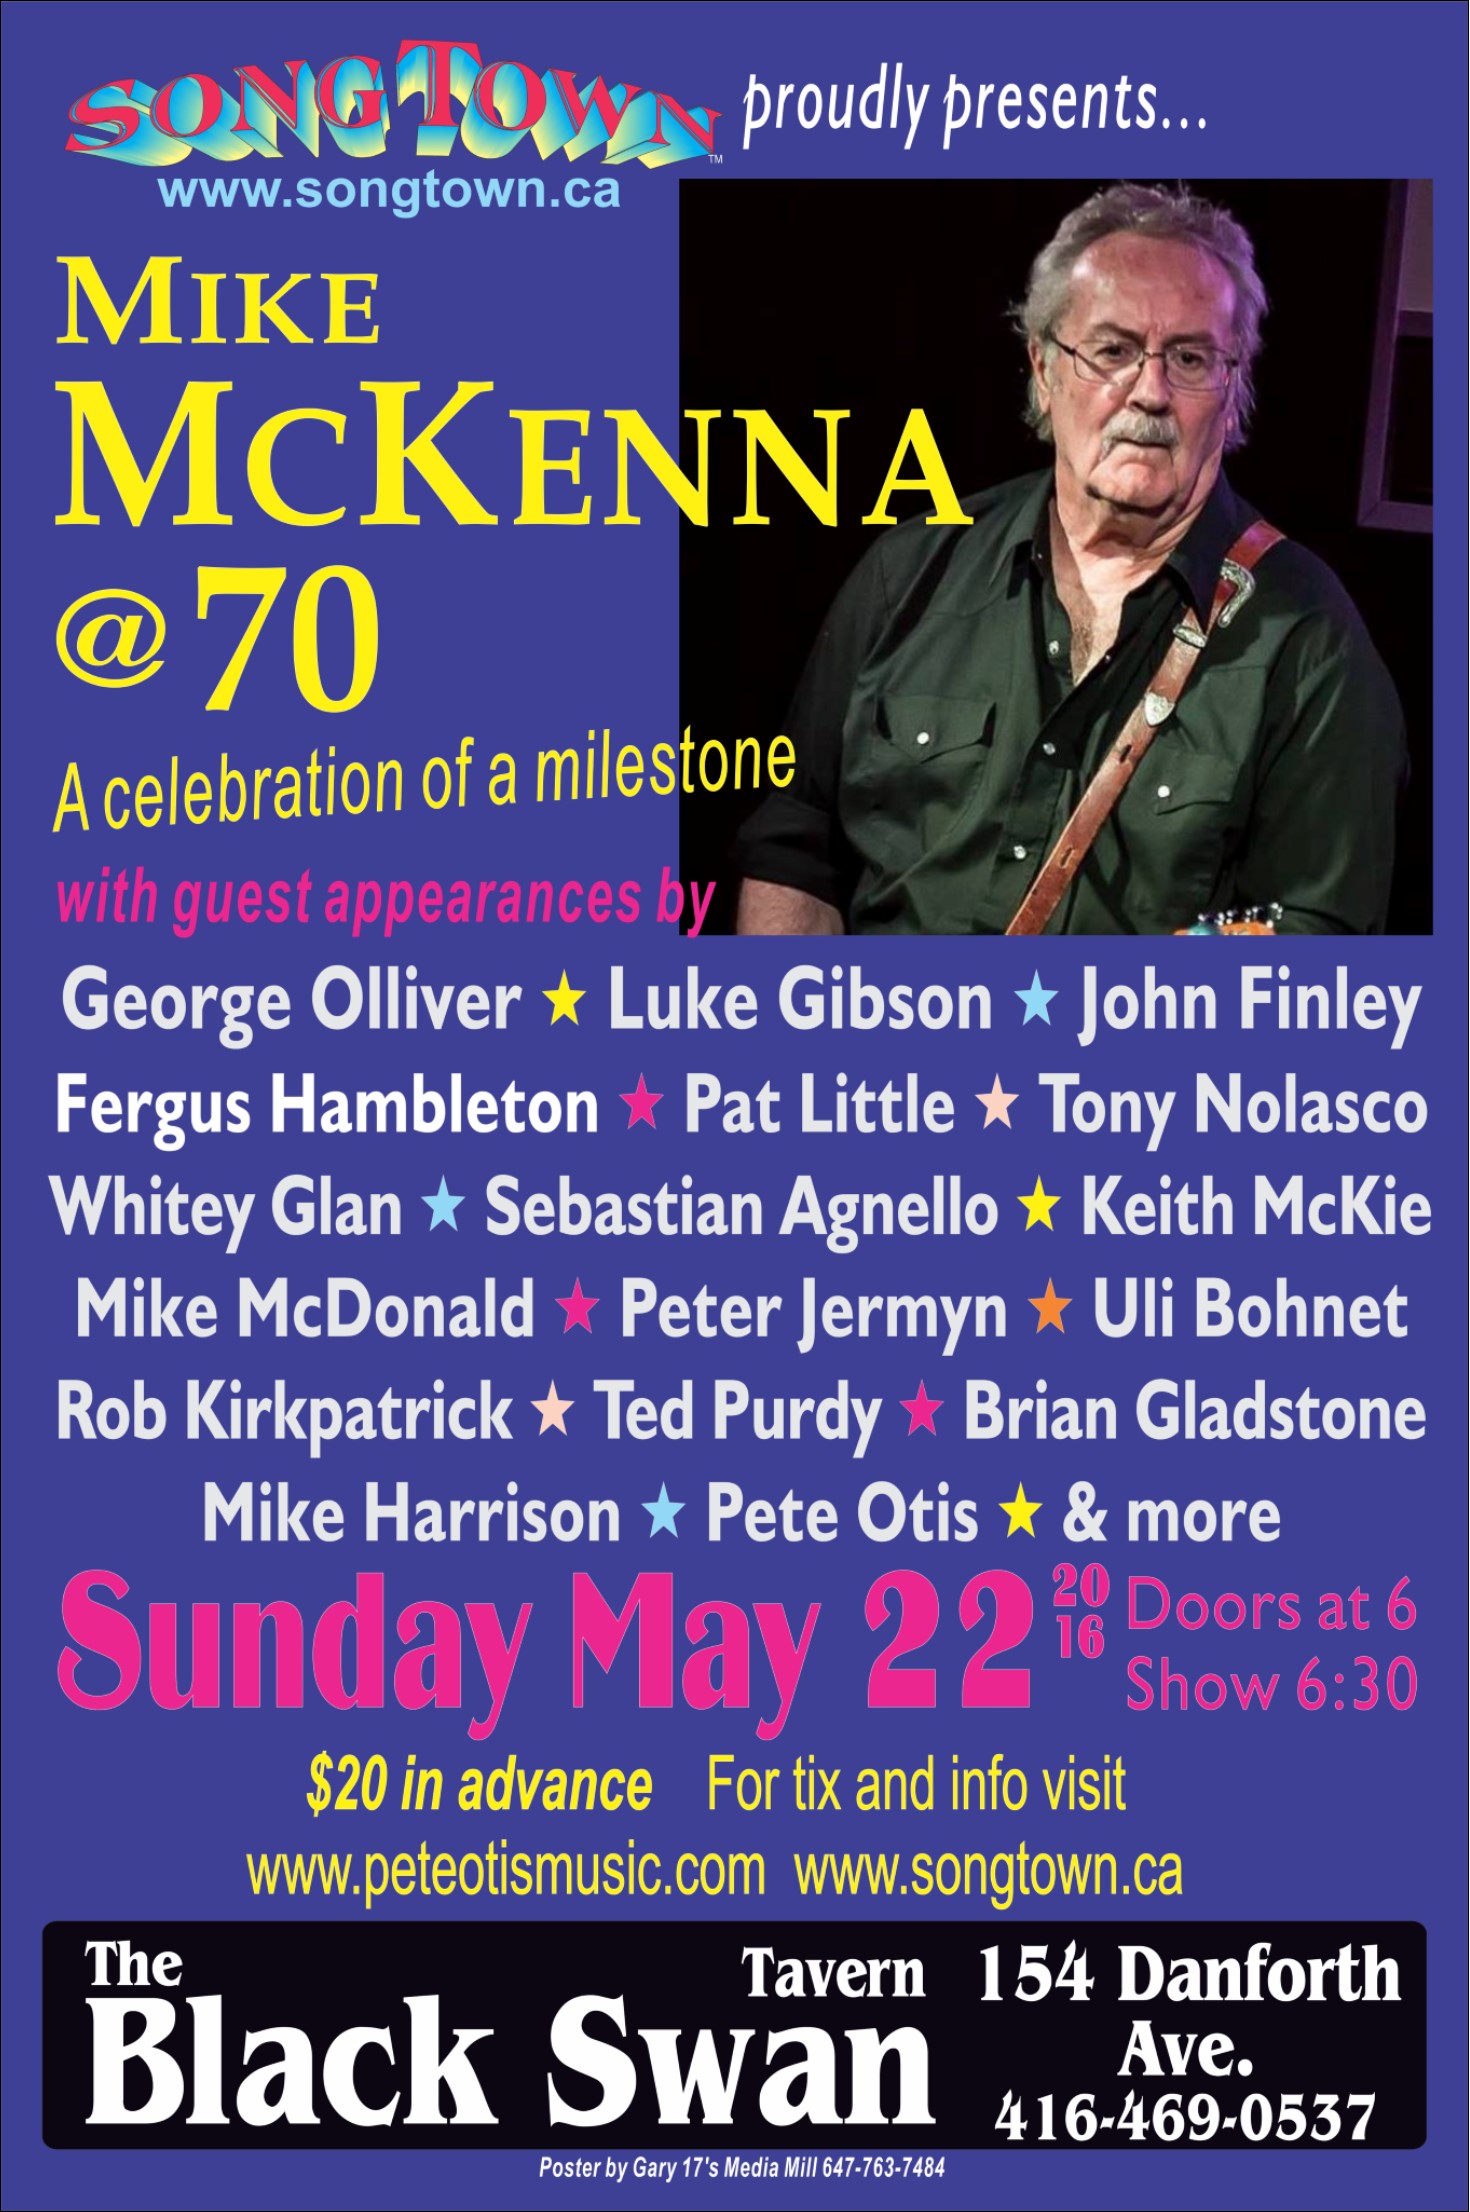 Playing Mike McKenna’s Birthday party